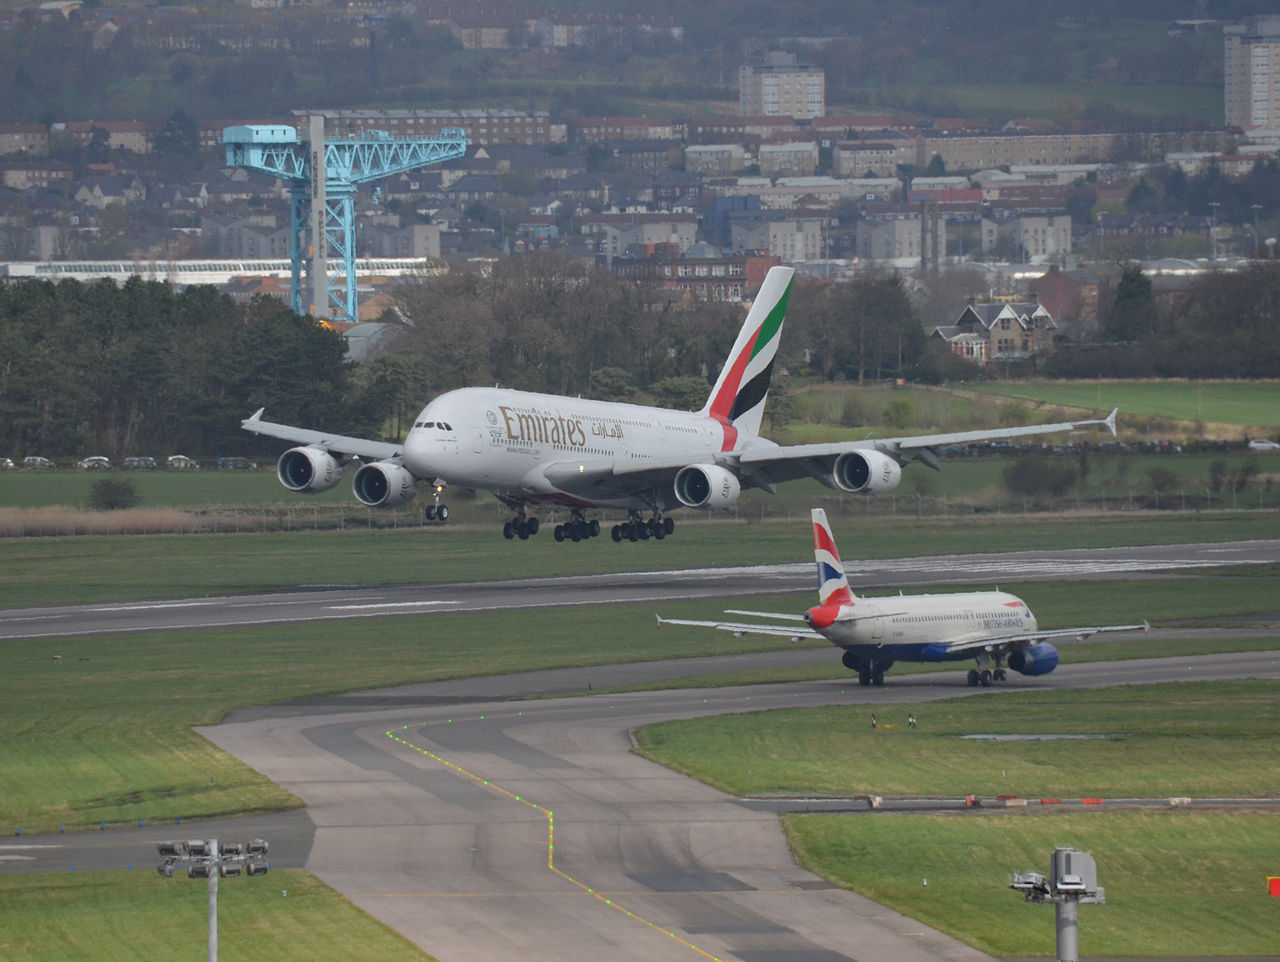 An Emirates flight takes off from Glasgow Airport.